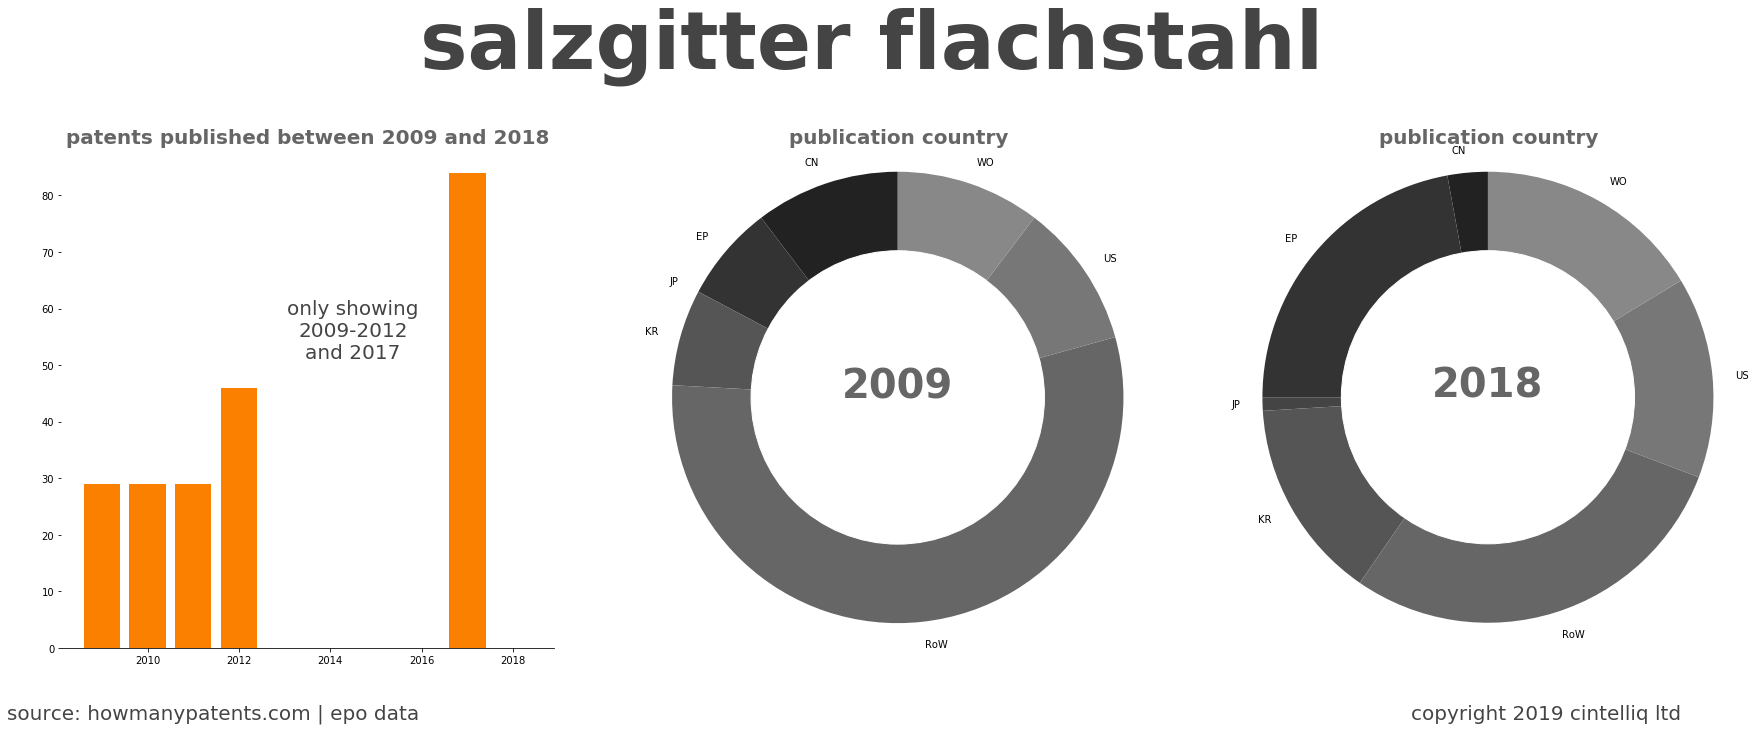 summary of patents for Salzgitter Flachstahl